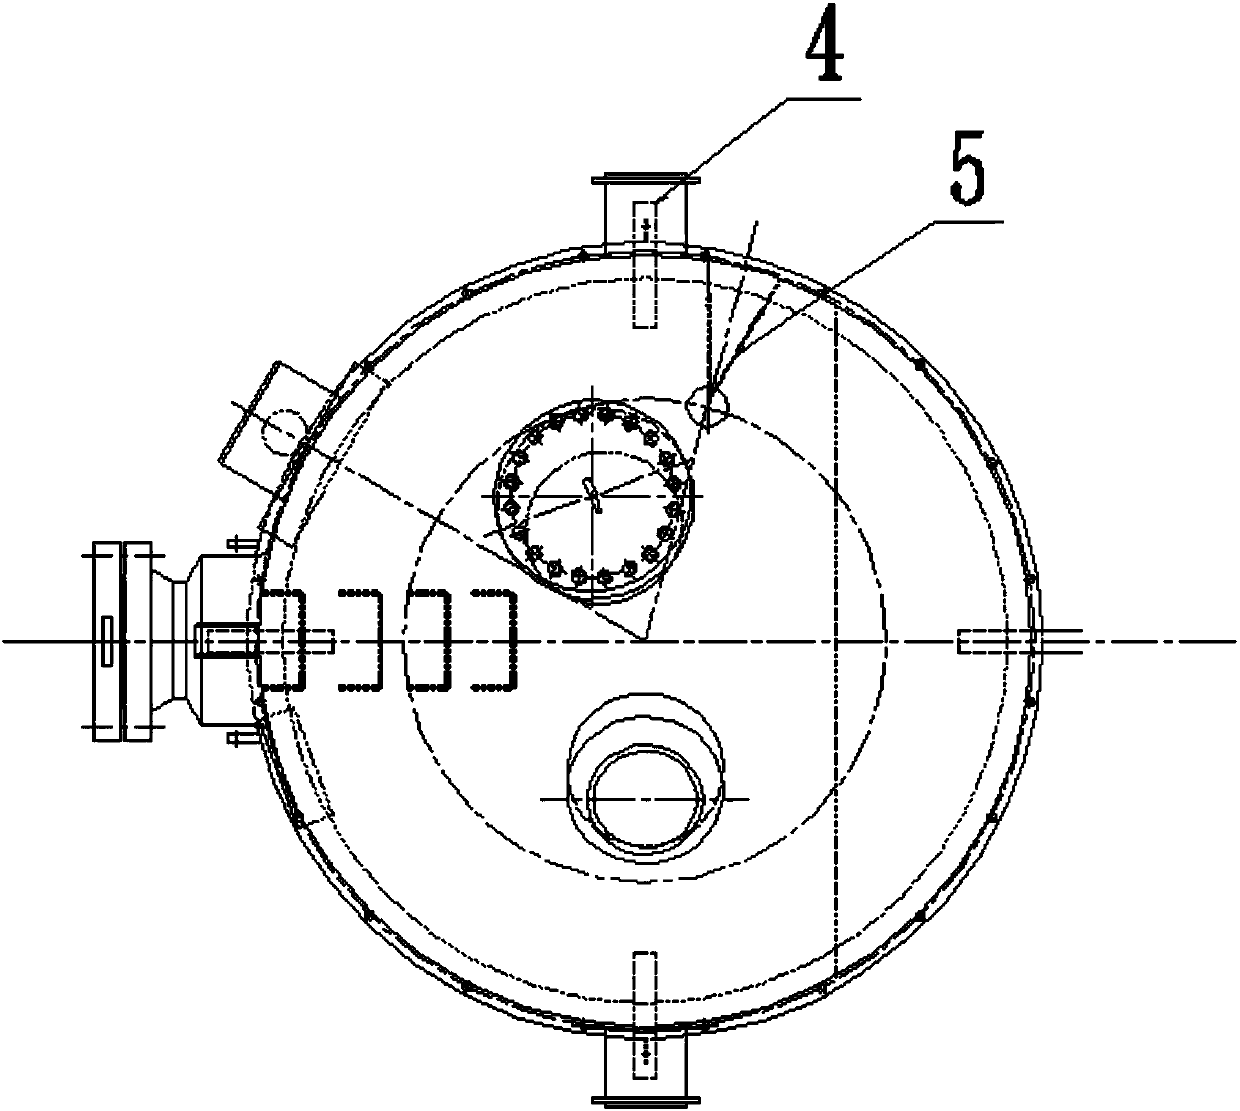 Hydrogenation reactor for petrochemical engineering